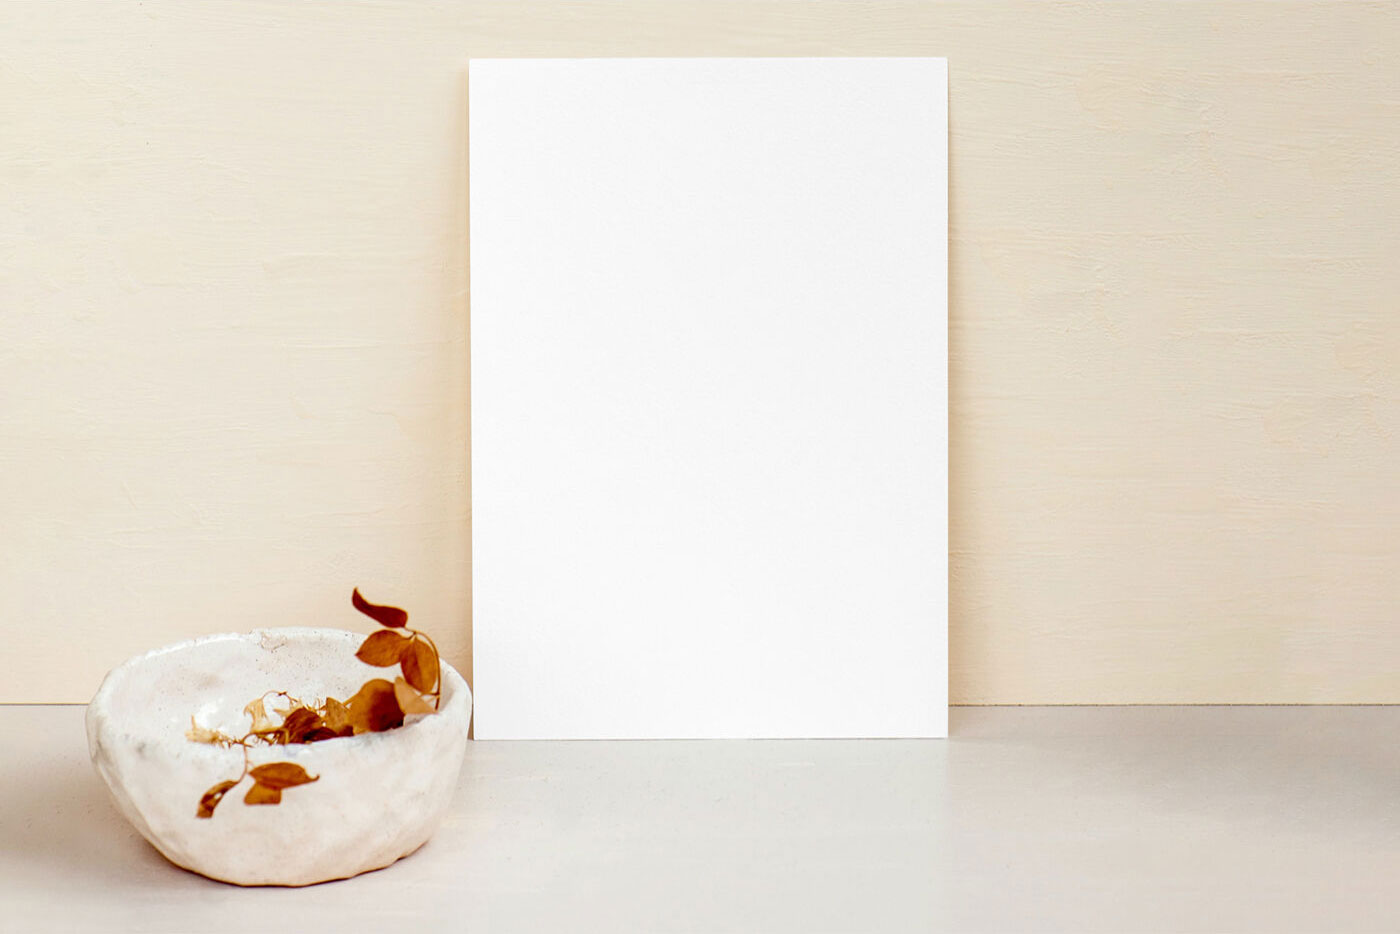 A4 Paper against Wall beside a Bowl Containing Dried Leaves Mockup FREE PSD